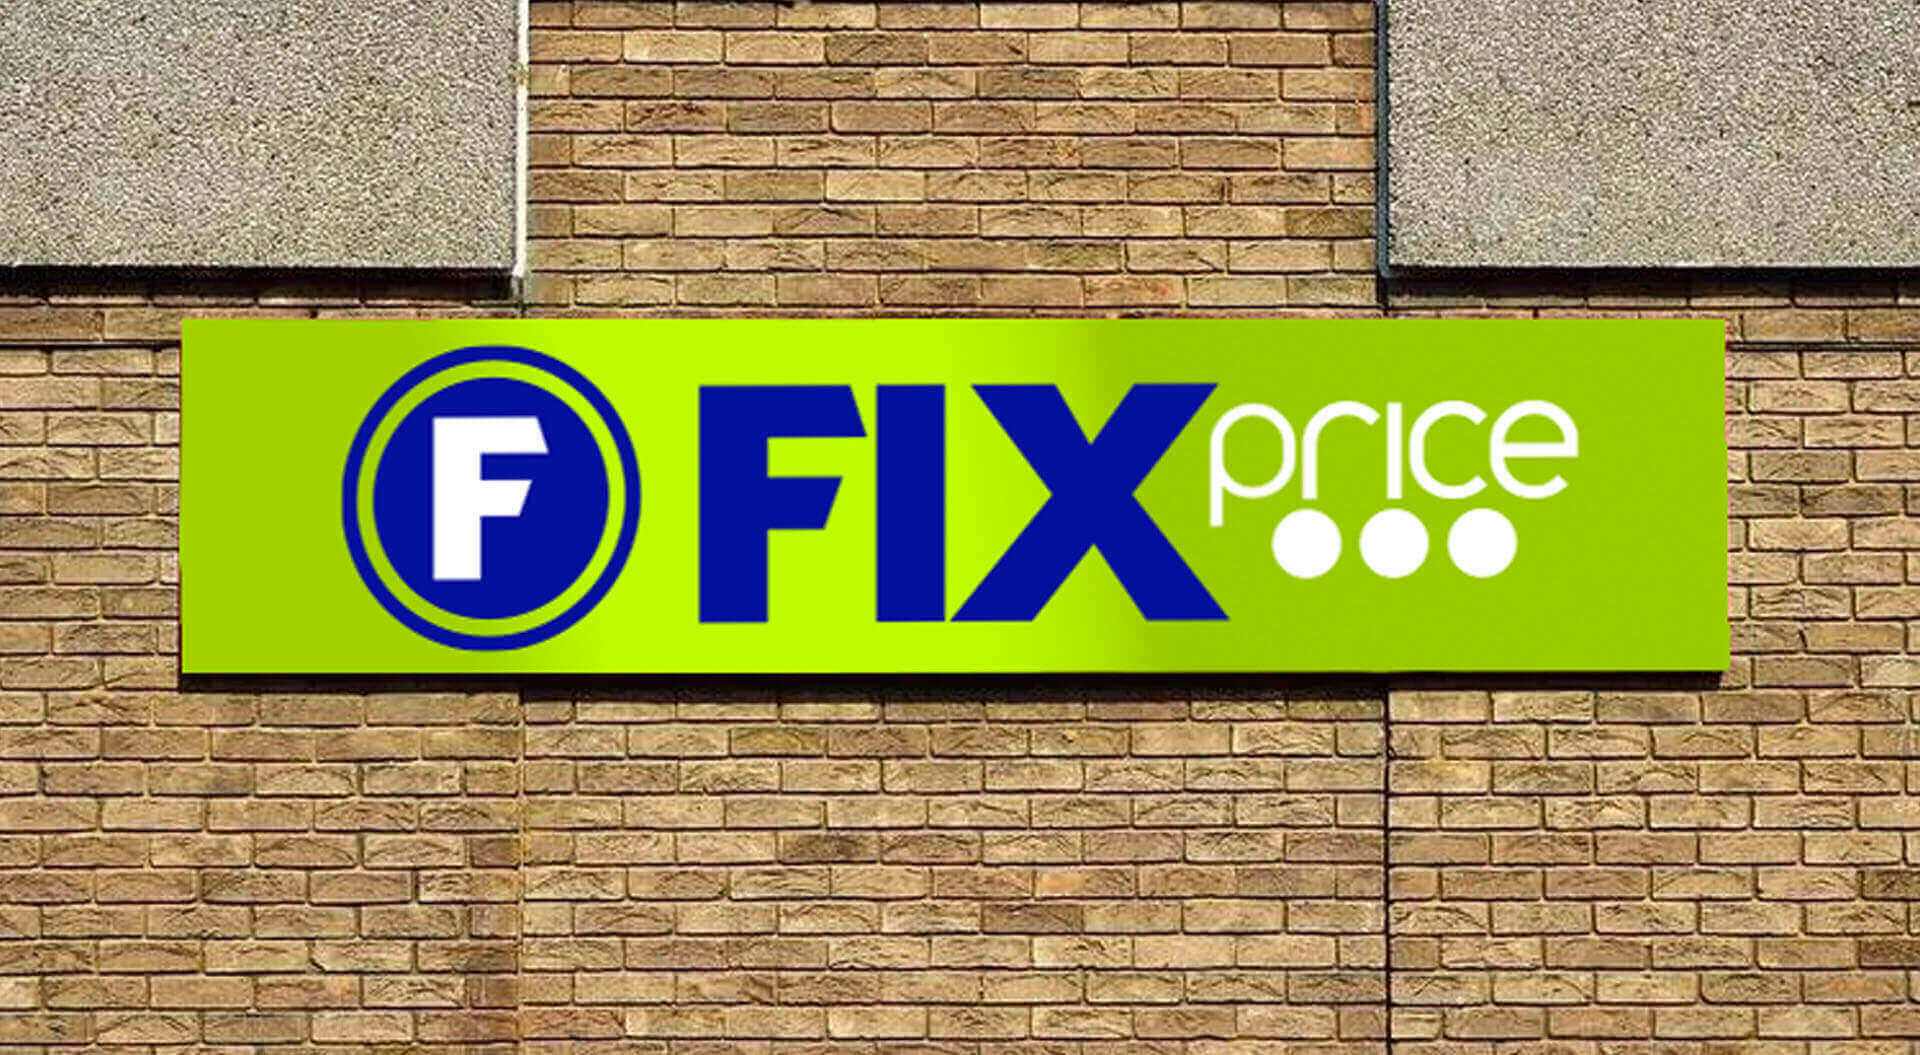 Fix Price Russia, External Building Signage Advertising, Retail Branding, Brand Identity, Store Interior Design, Graphic Communications - CampbellRigg Agency